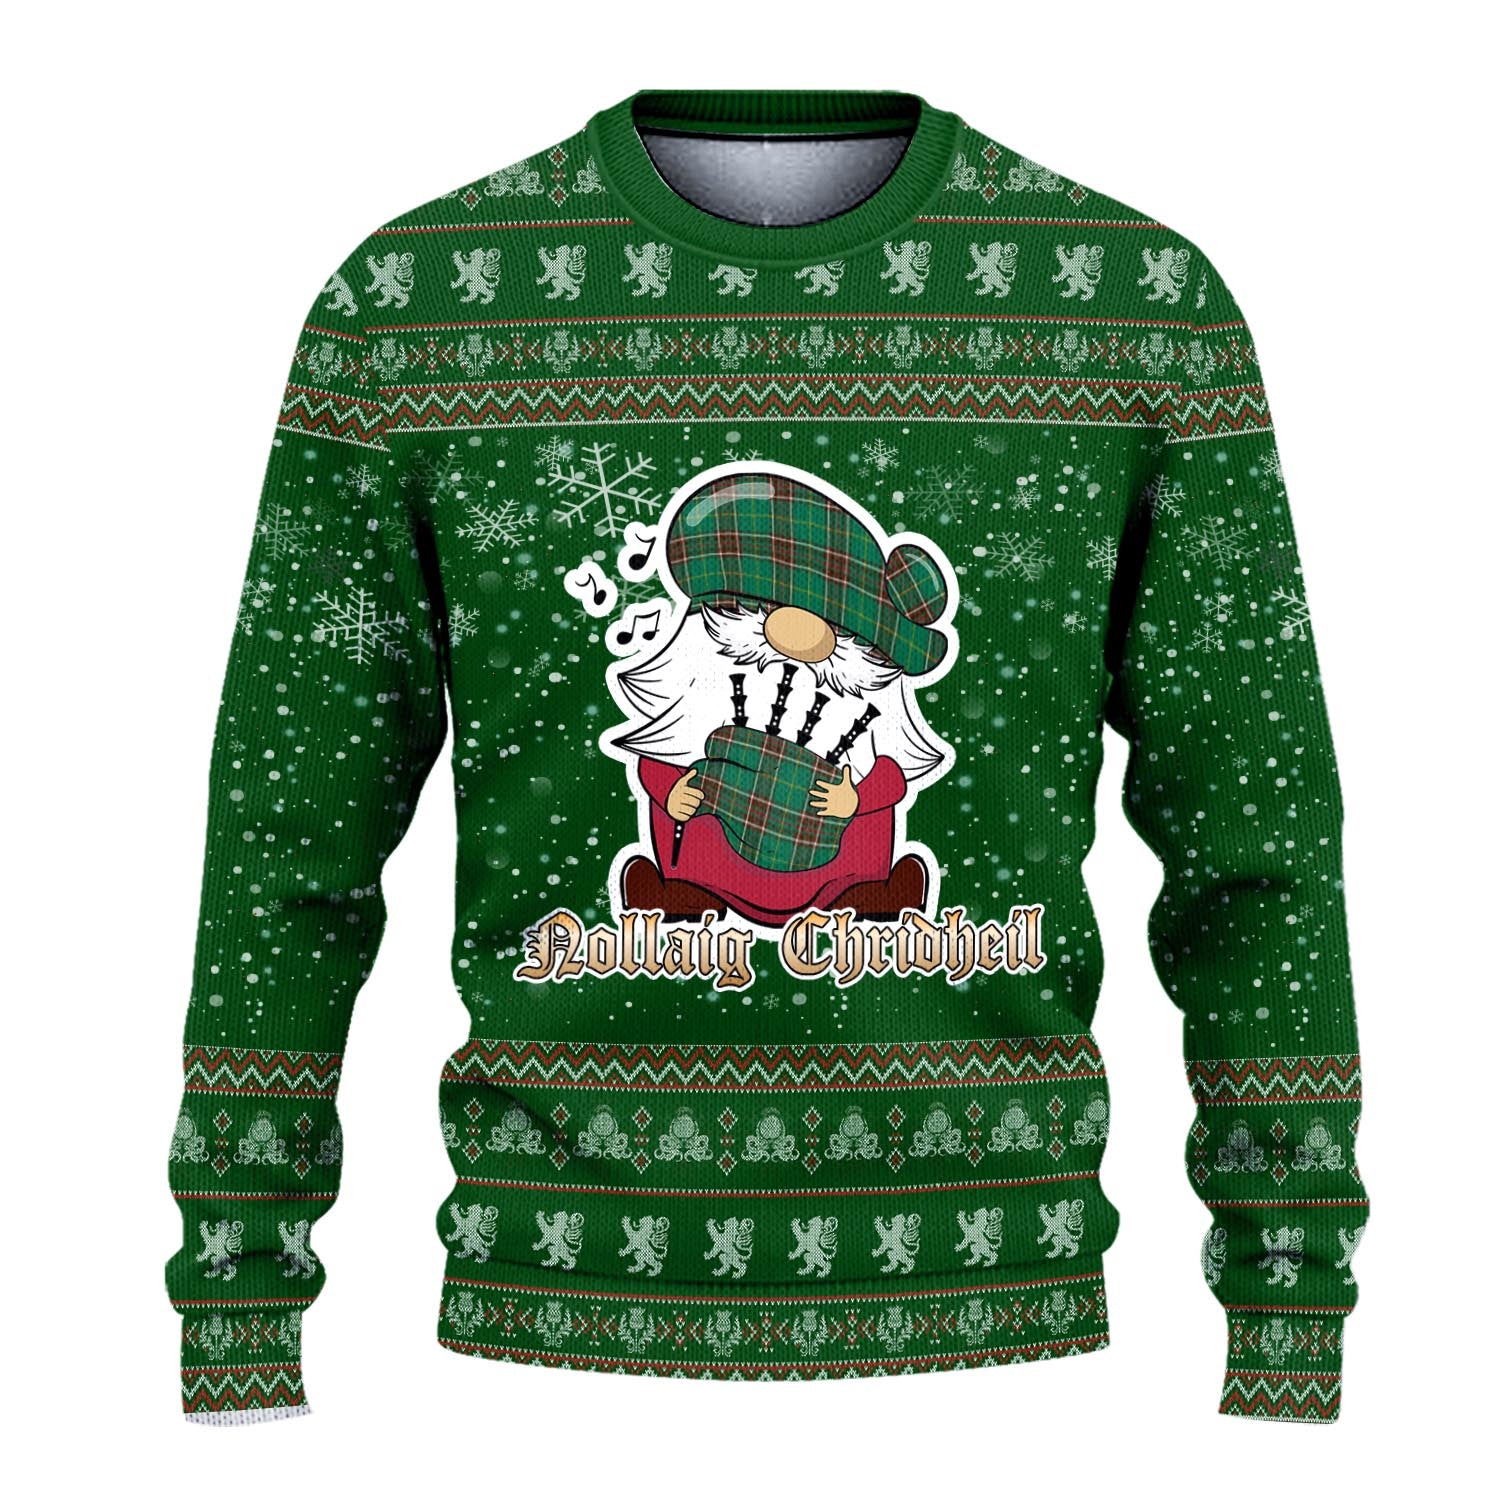 Newfoundland And Labrador Province Canada Clan Christmas Family Knitted Sweater with Funny Gnome Playing Bagpipes - Tartanvibesclothing